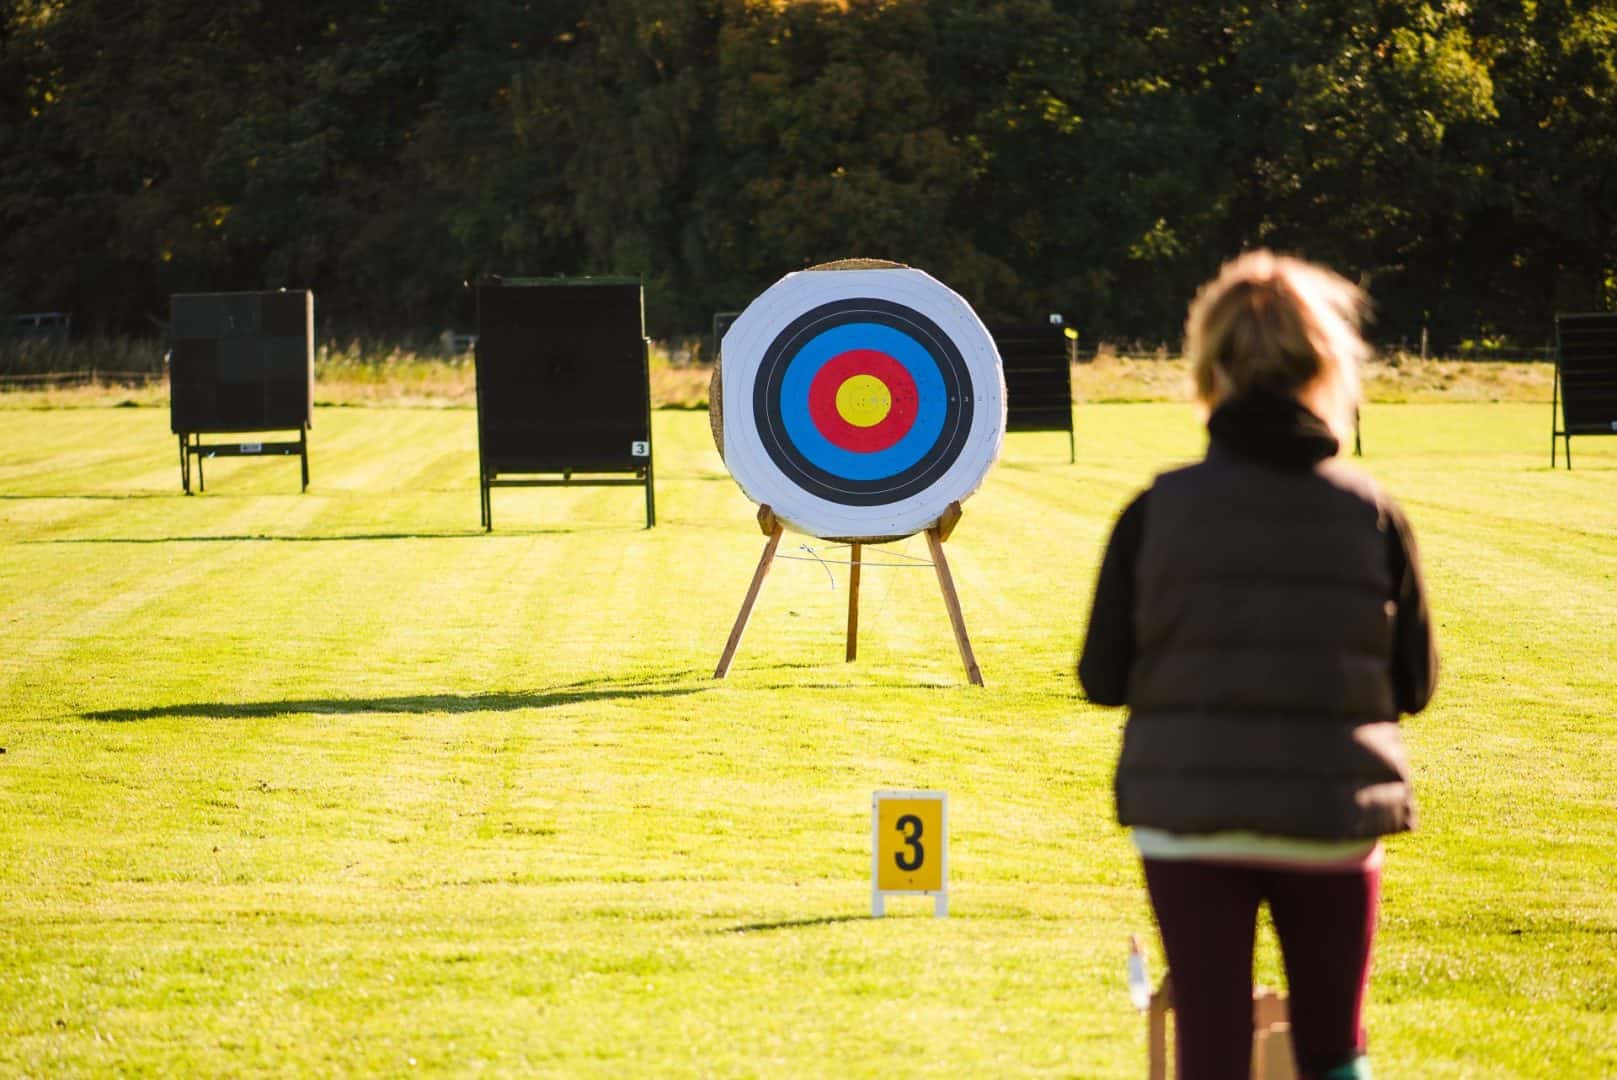 Indoor archery restrictions reduced in England and Wales